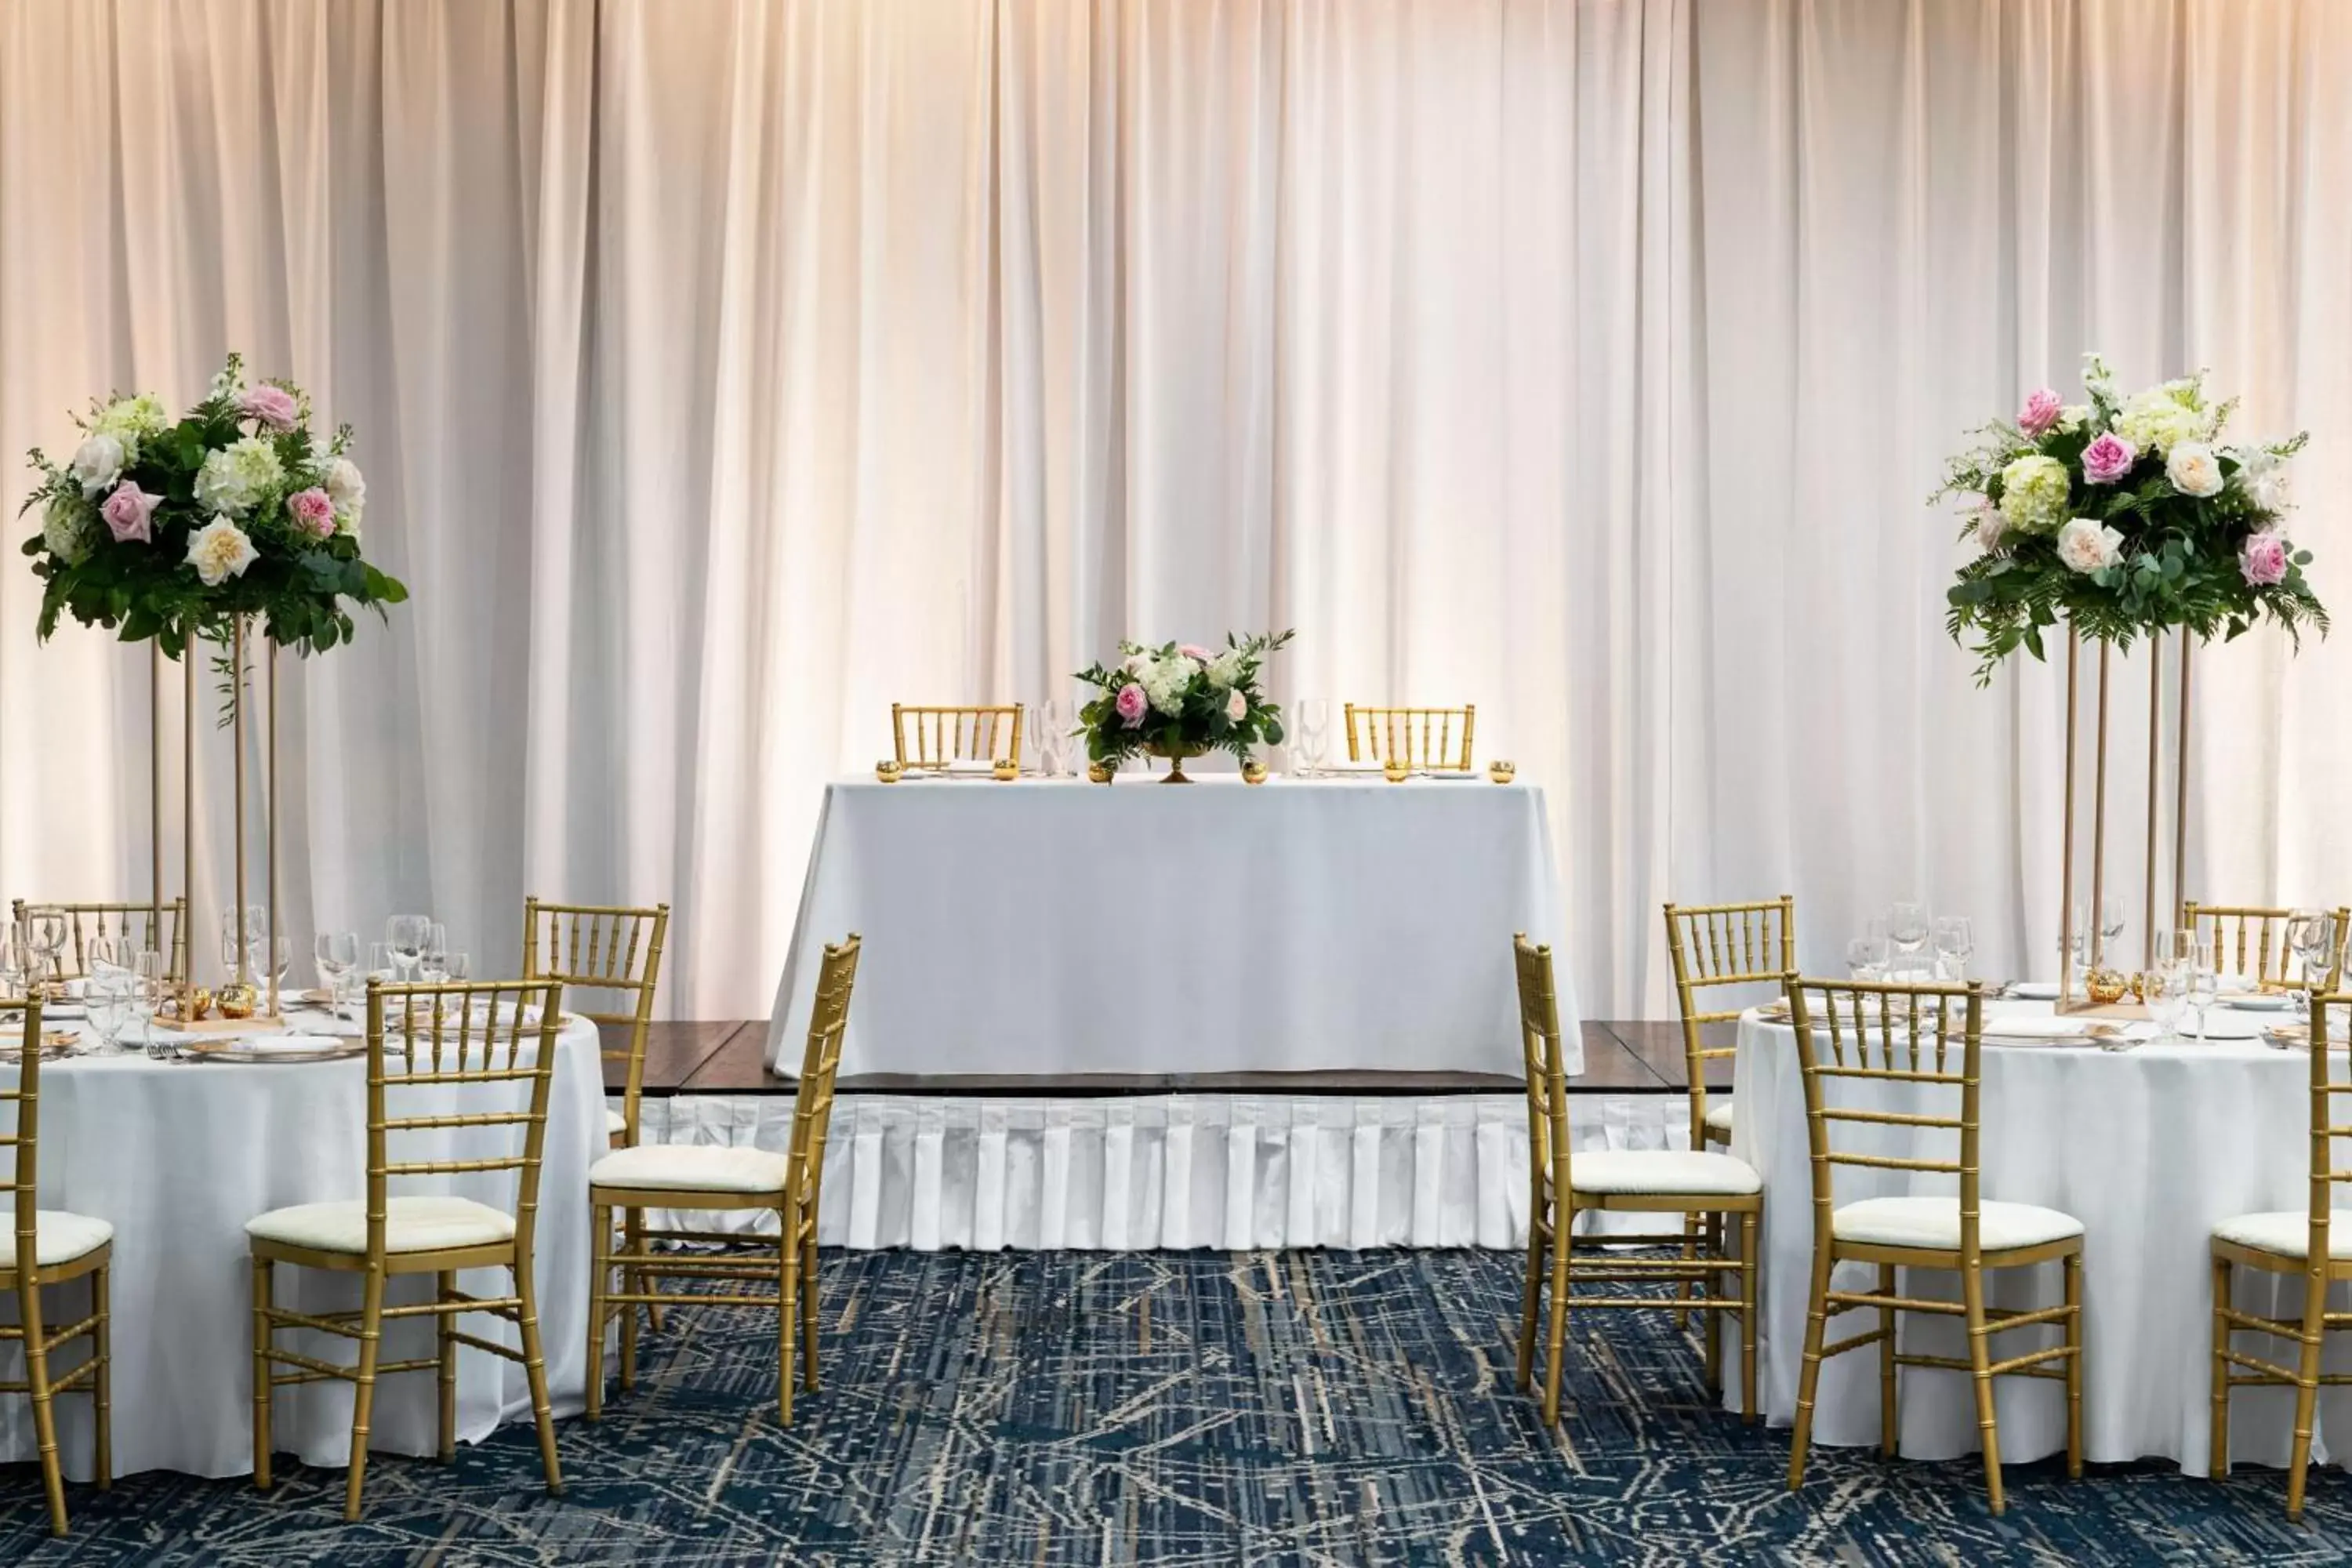 Banquet/Function facilities, Banquet Facilities in Sheraton Suites Chicago O'Hare